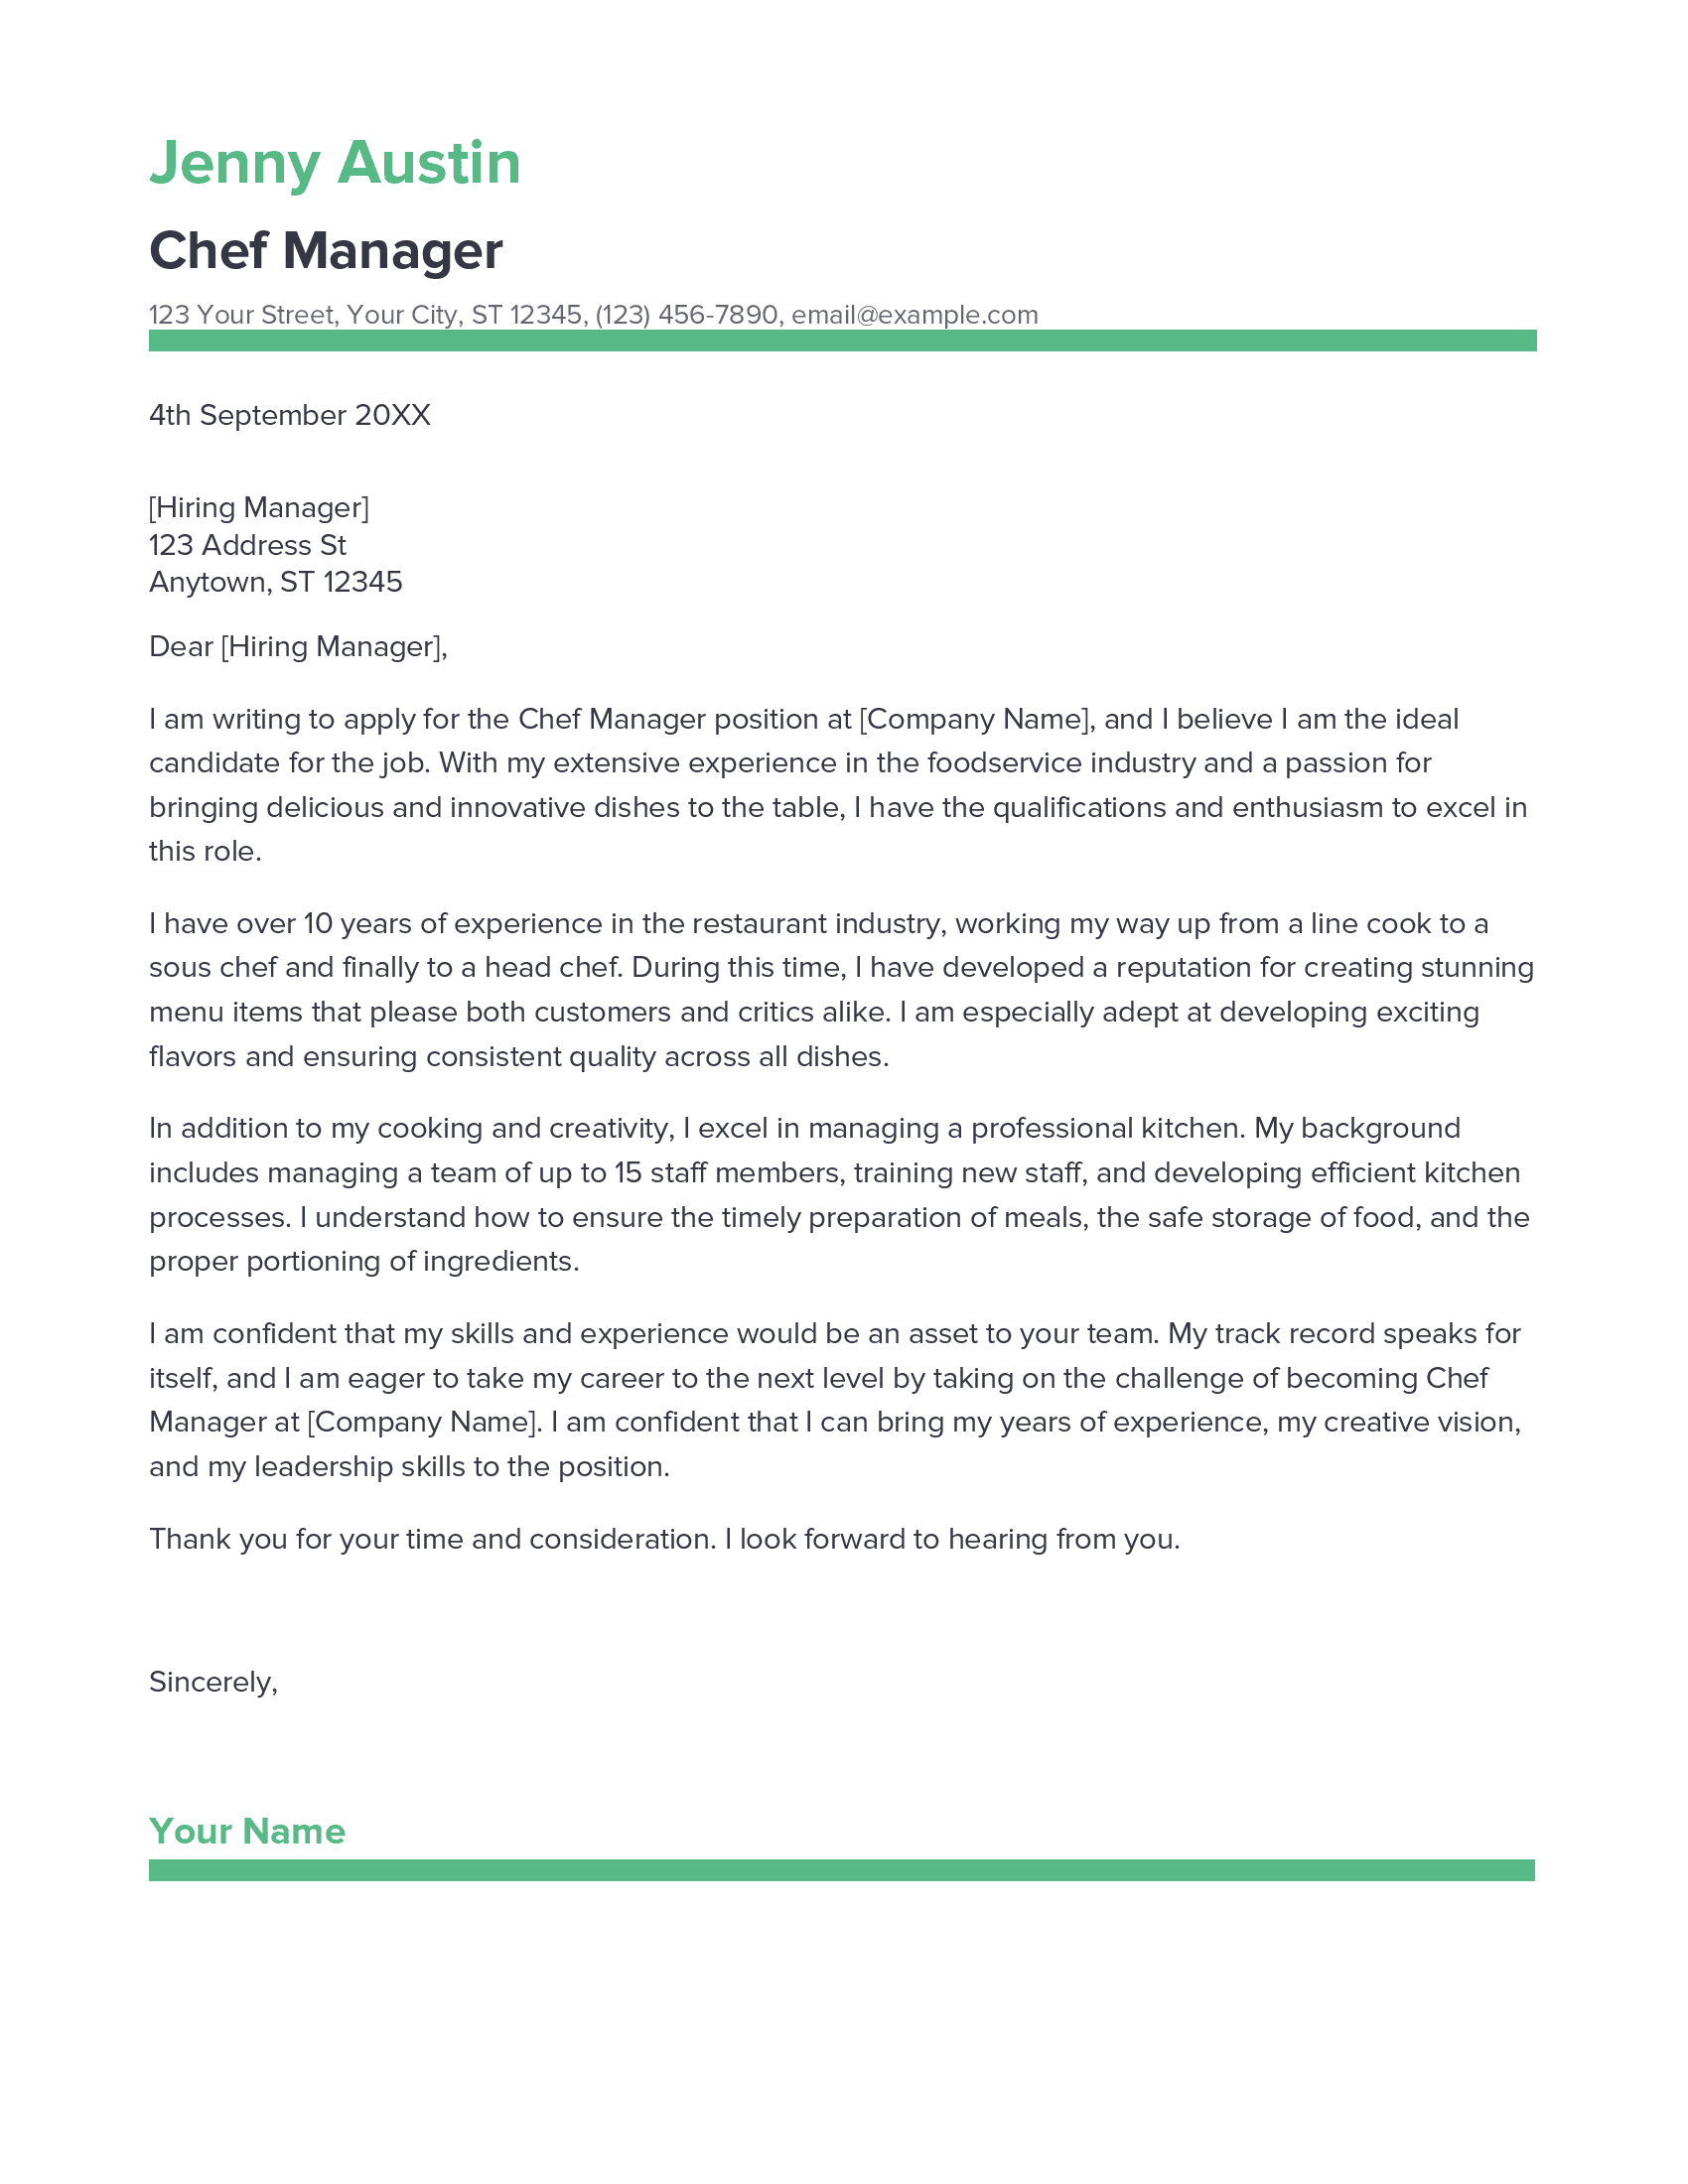 chef manager application letter